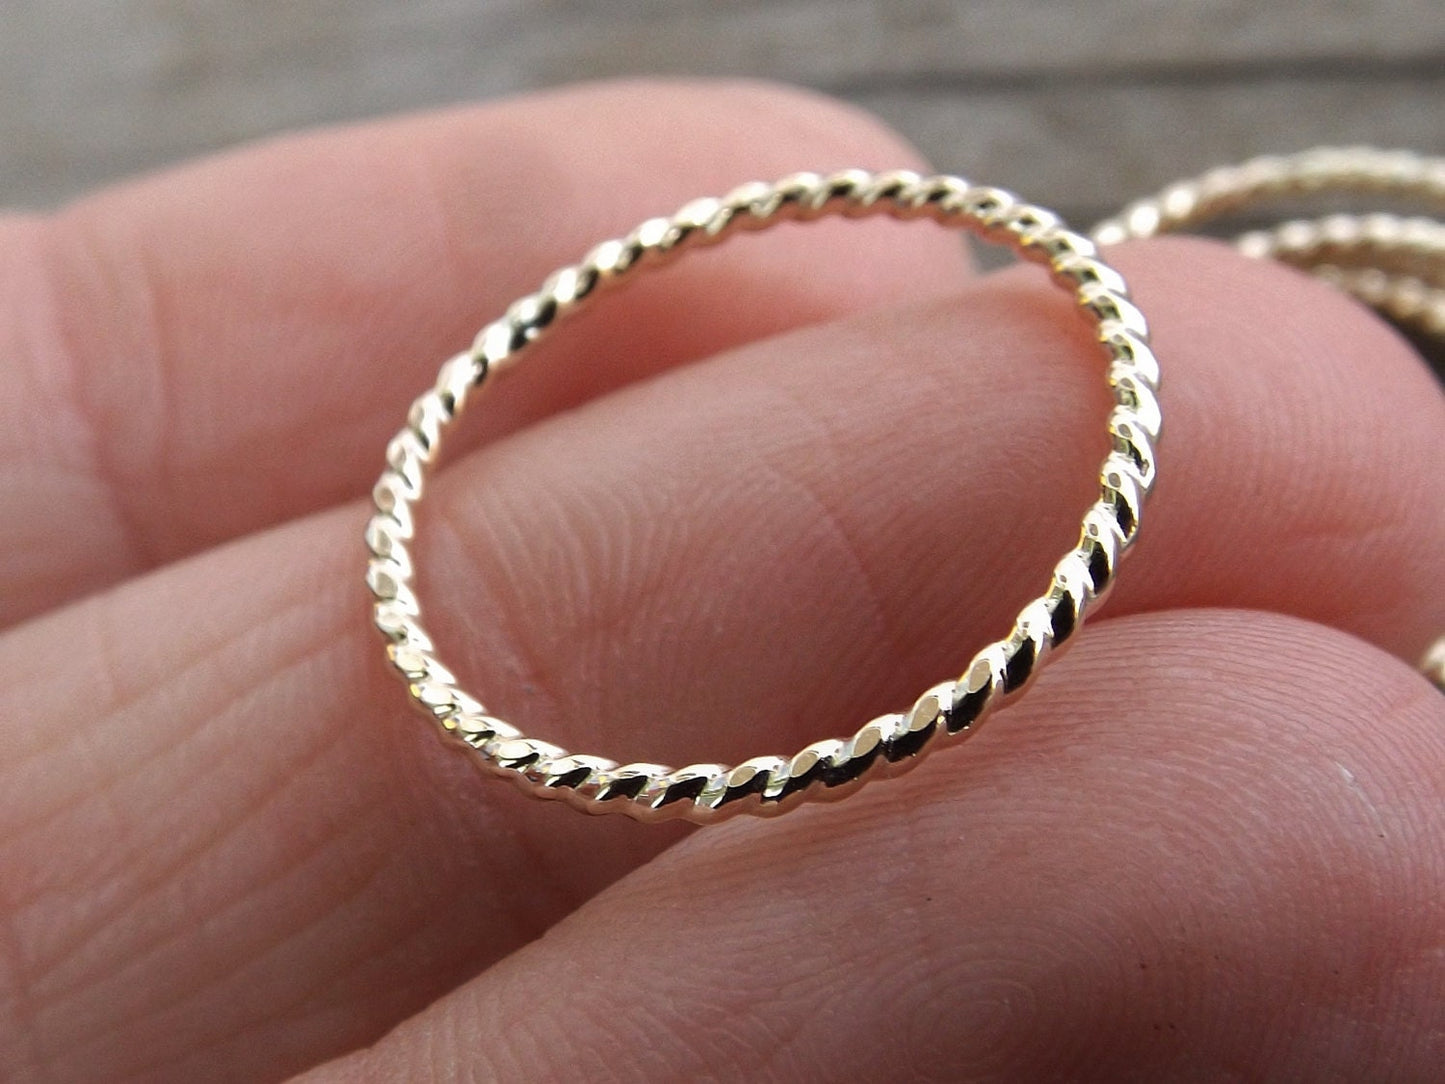 Gold Rope Ring, Stackable Ring, Twisted Ring, Rope Band, Simple Band, Minimalist, Thumb Ring, Simple Ring,Stacker,Boho Chic, Twist Ring